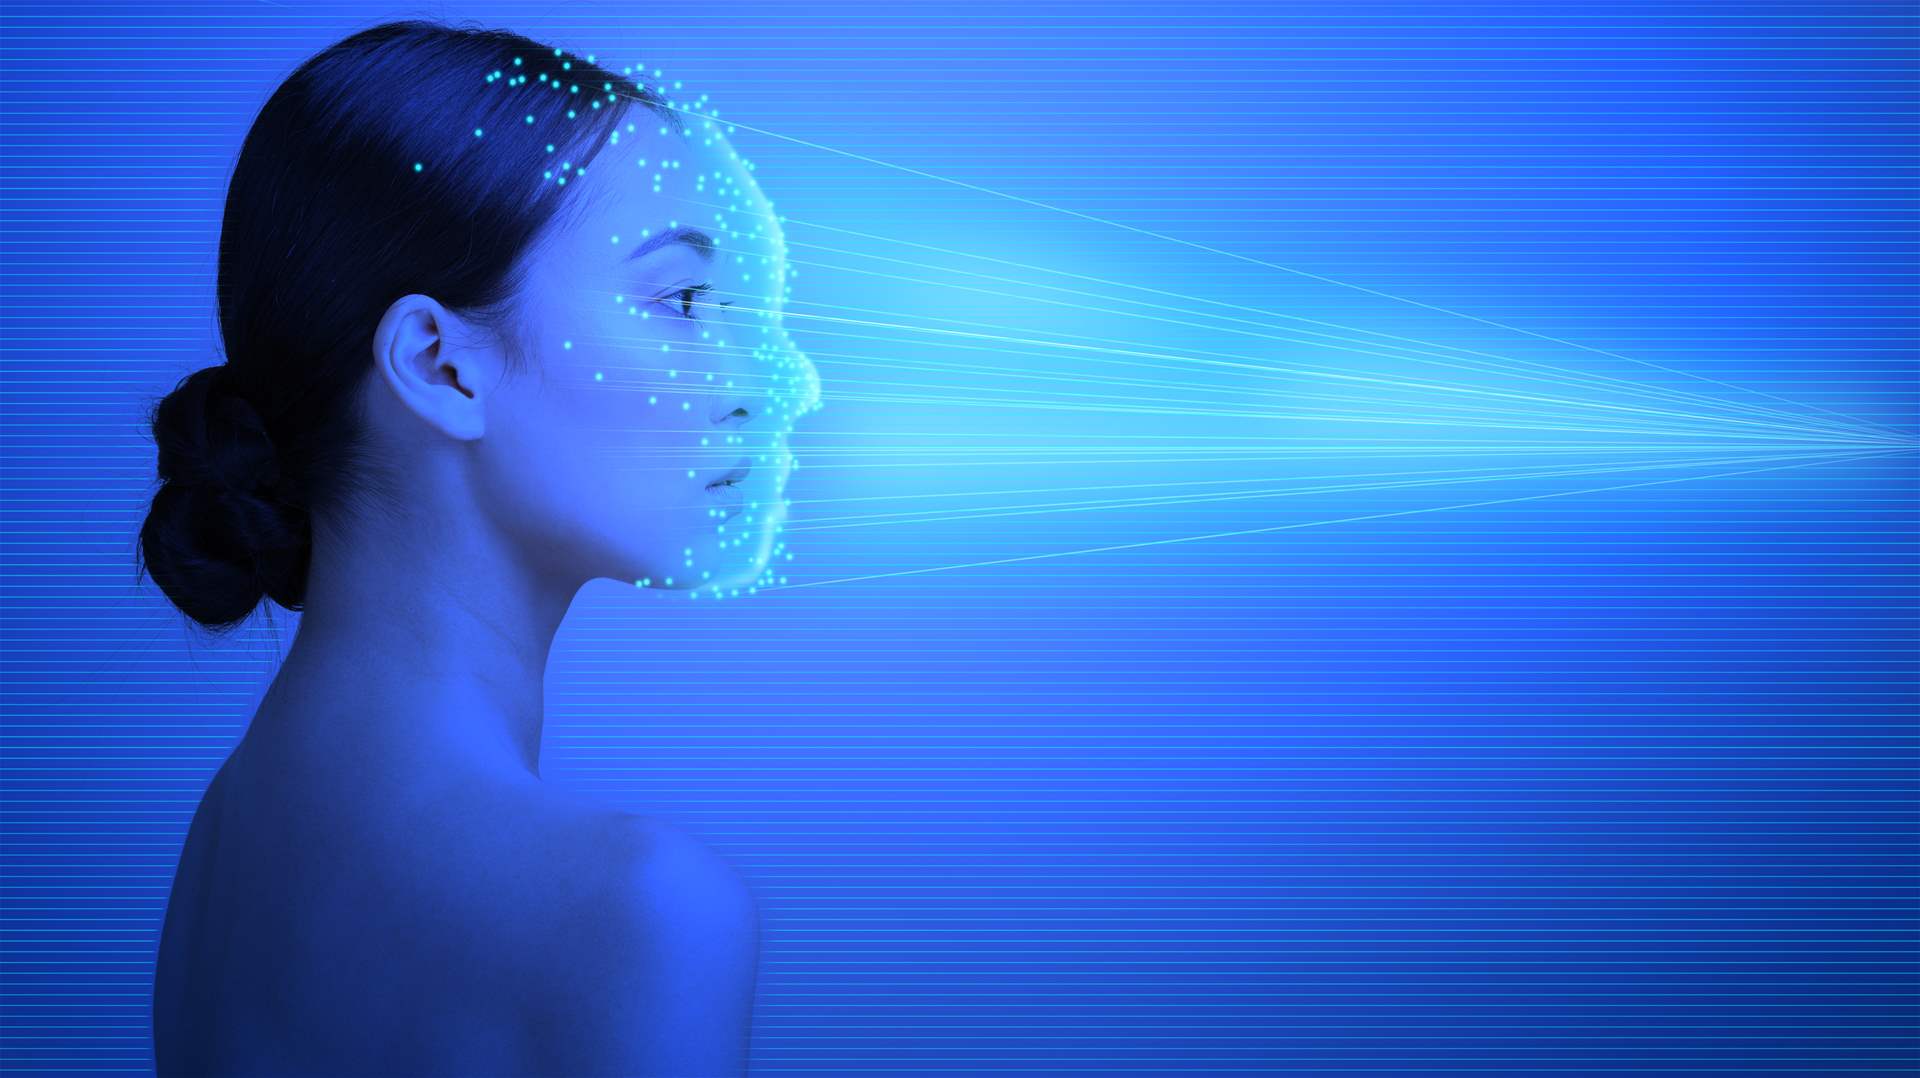 Relationships between humans and holograms: Will it be the next frontier in the ages of love